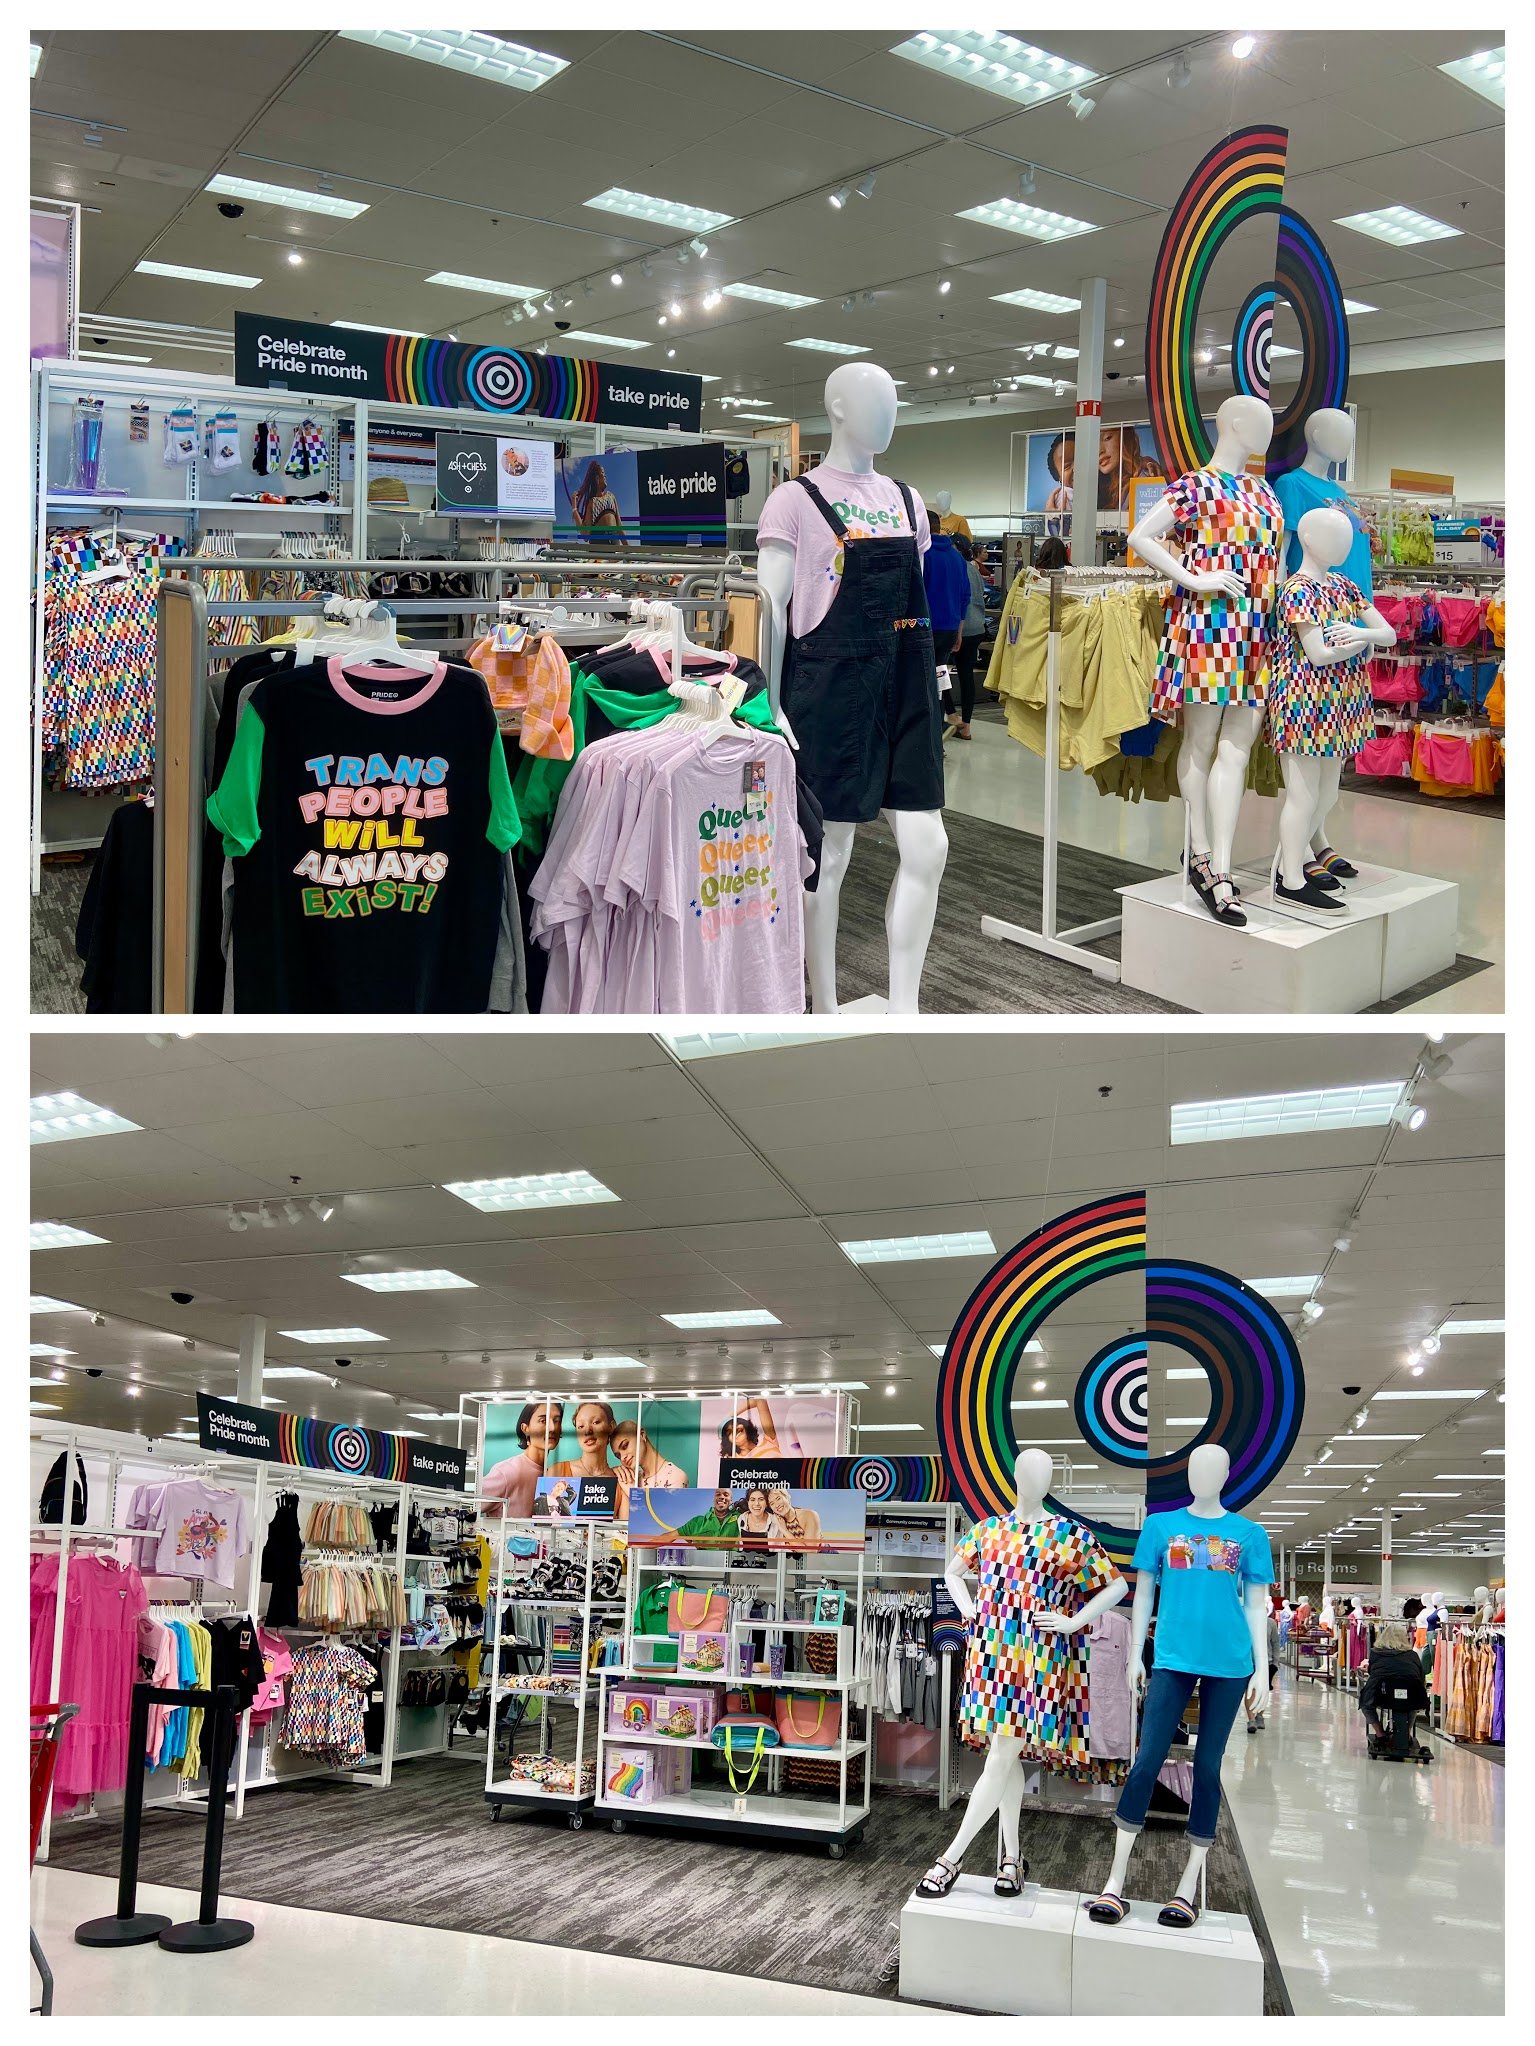 Two photos of an apparel display, slightly altered with different merchandise and mannequins.